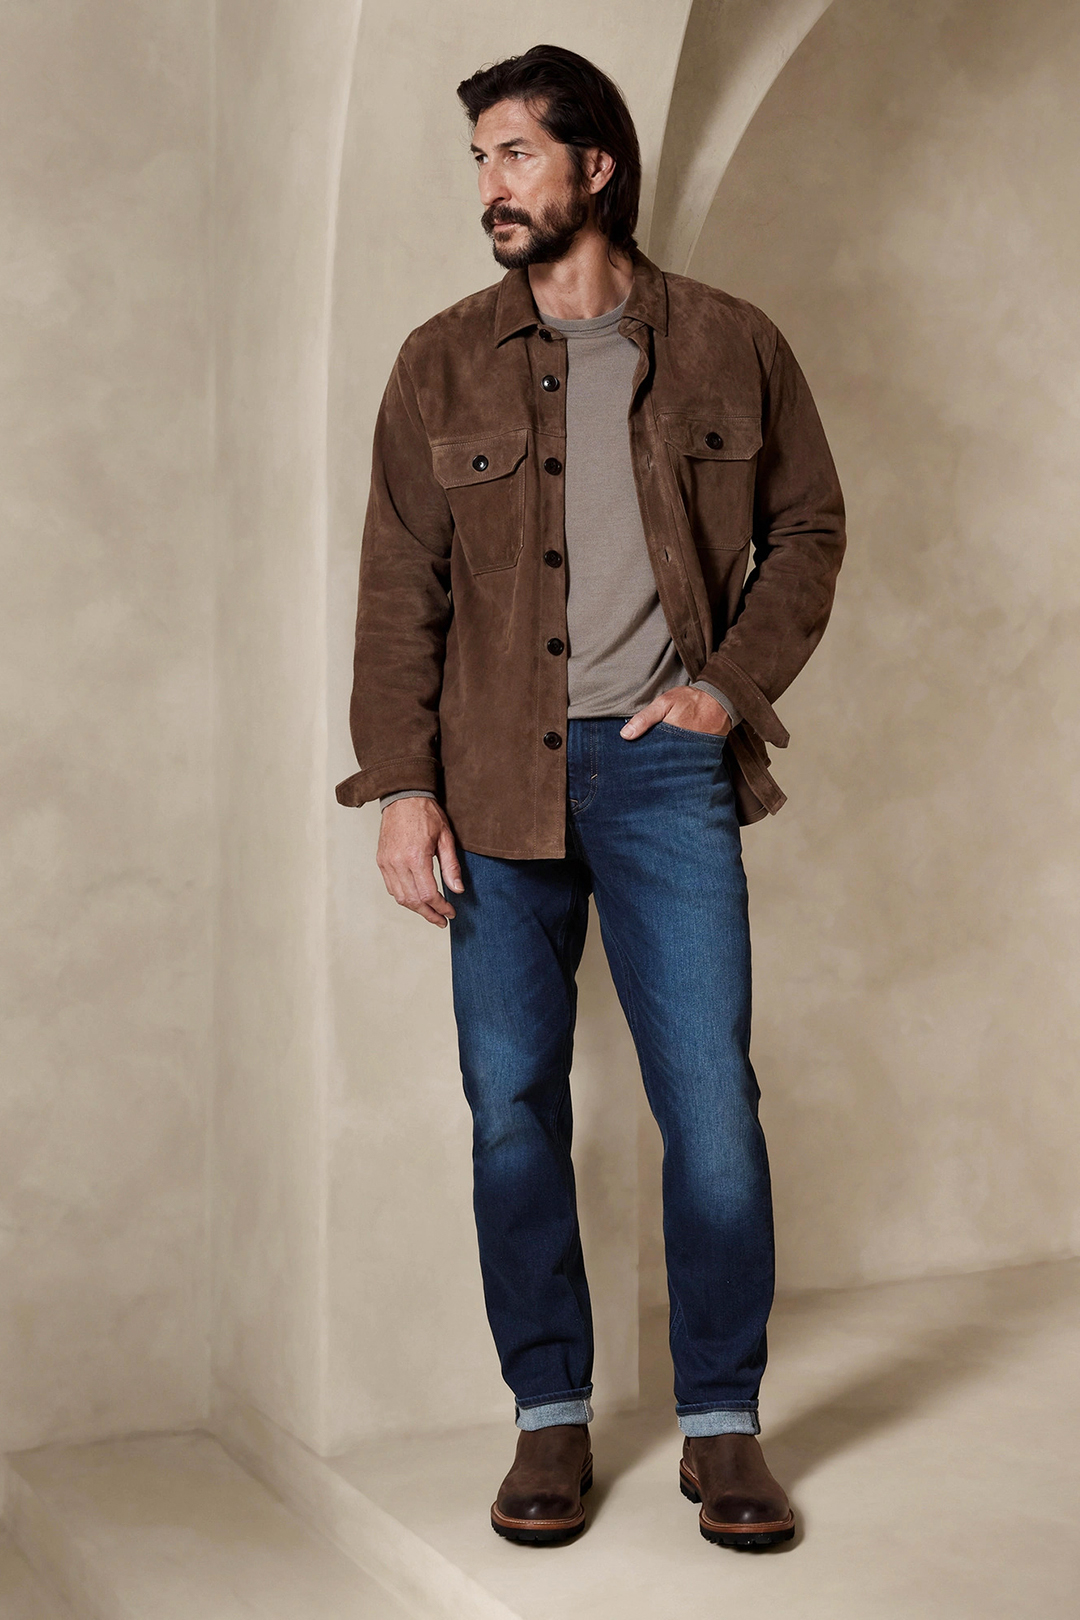 Brown suede trucker jacket, grey crew-neck sweater, blue jeans, and dark brown Chelsea boots outfit